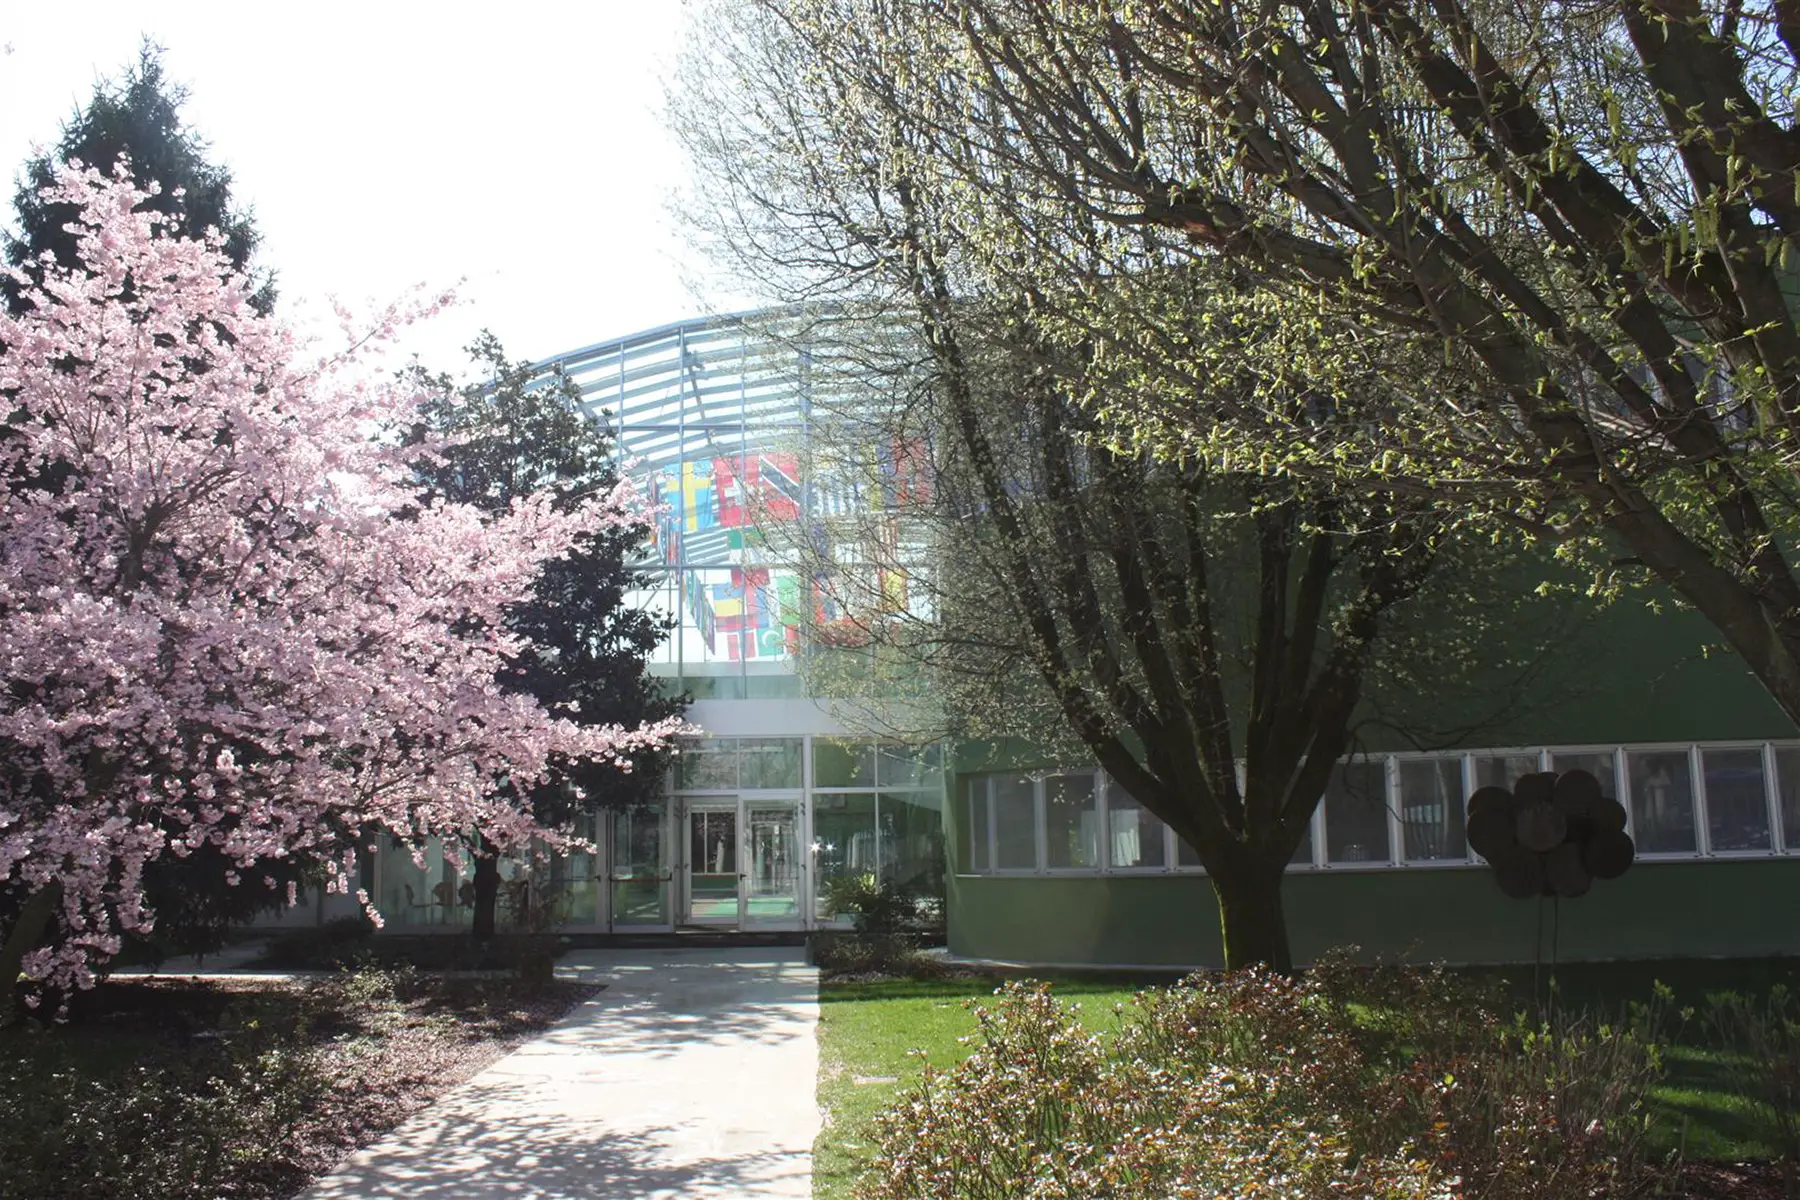 A school entrance with a glass front, flags of many countries hanging inside. Blossom tree outside.